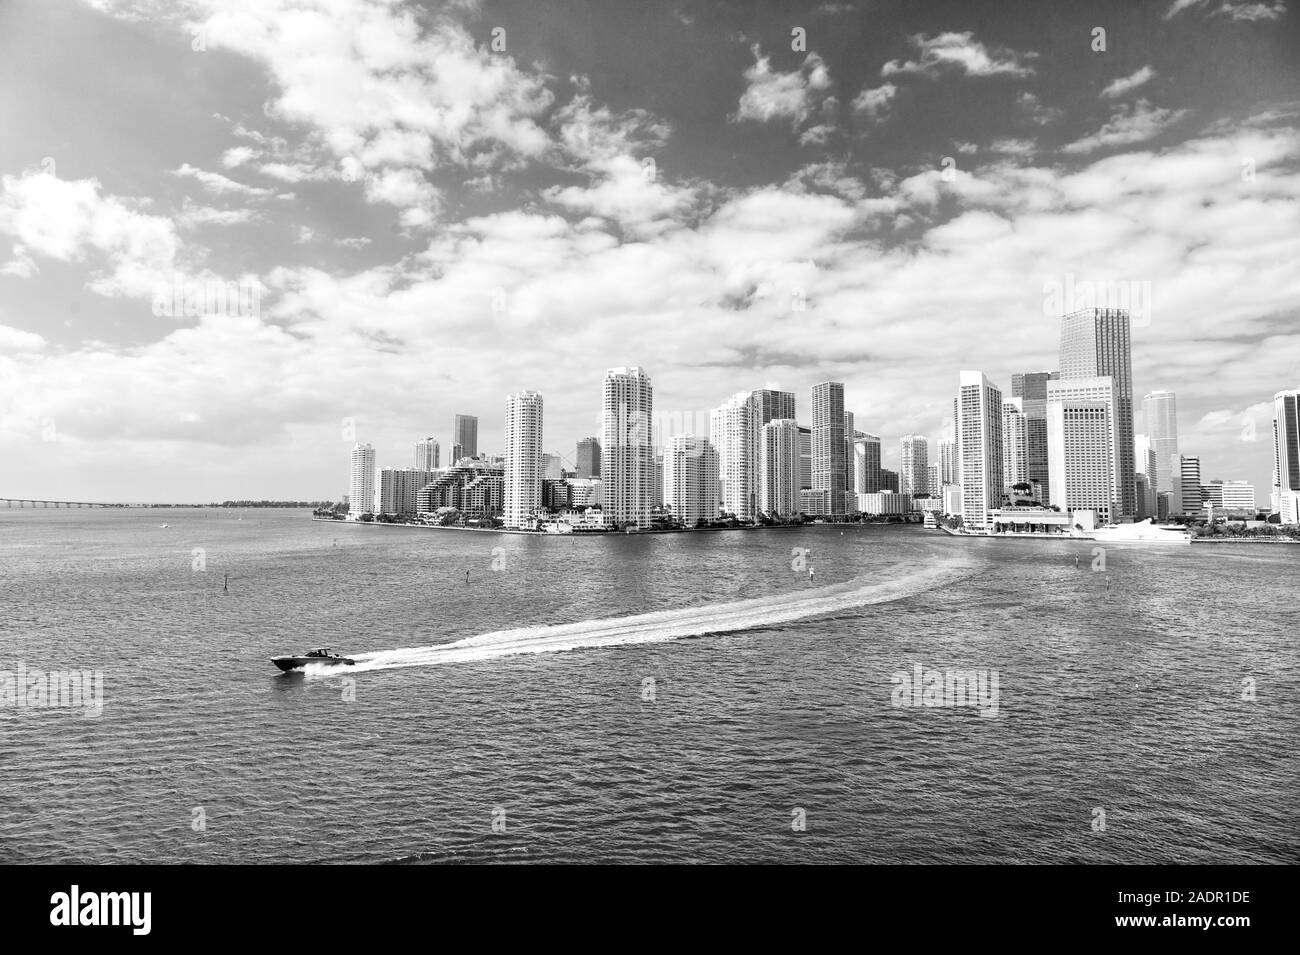 Architecturally impressive high rise towers. Skyscrapers and azure ocean water. Must see attractions. Miami waterfront lined with marinas. Downtown Miami urban city center. Business District of Miami. Stock Photo